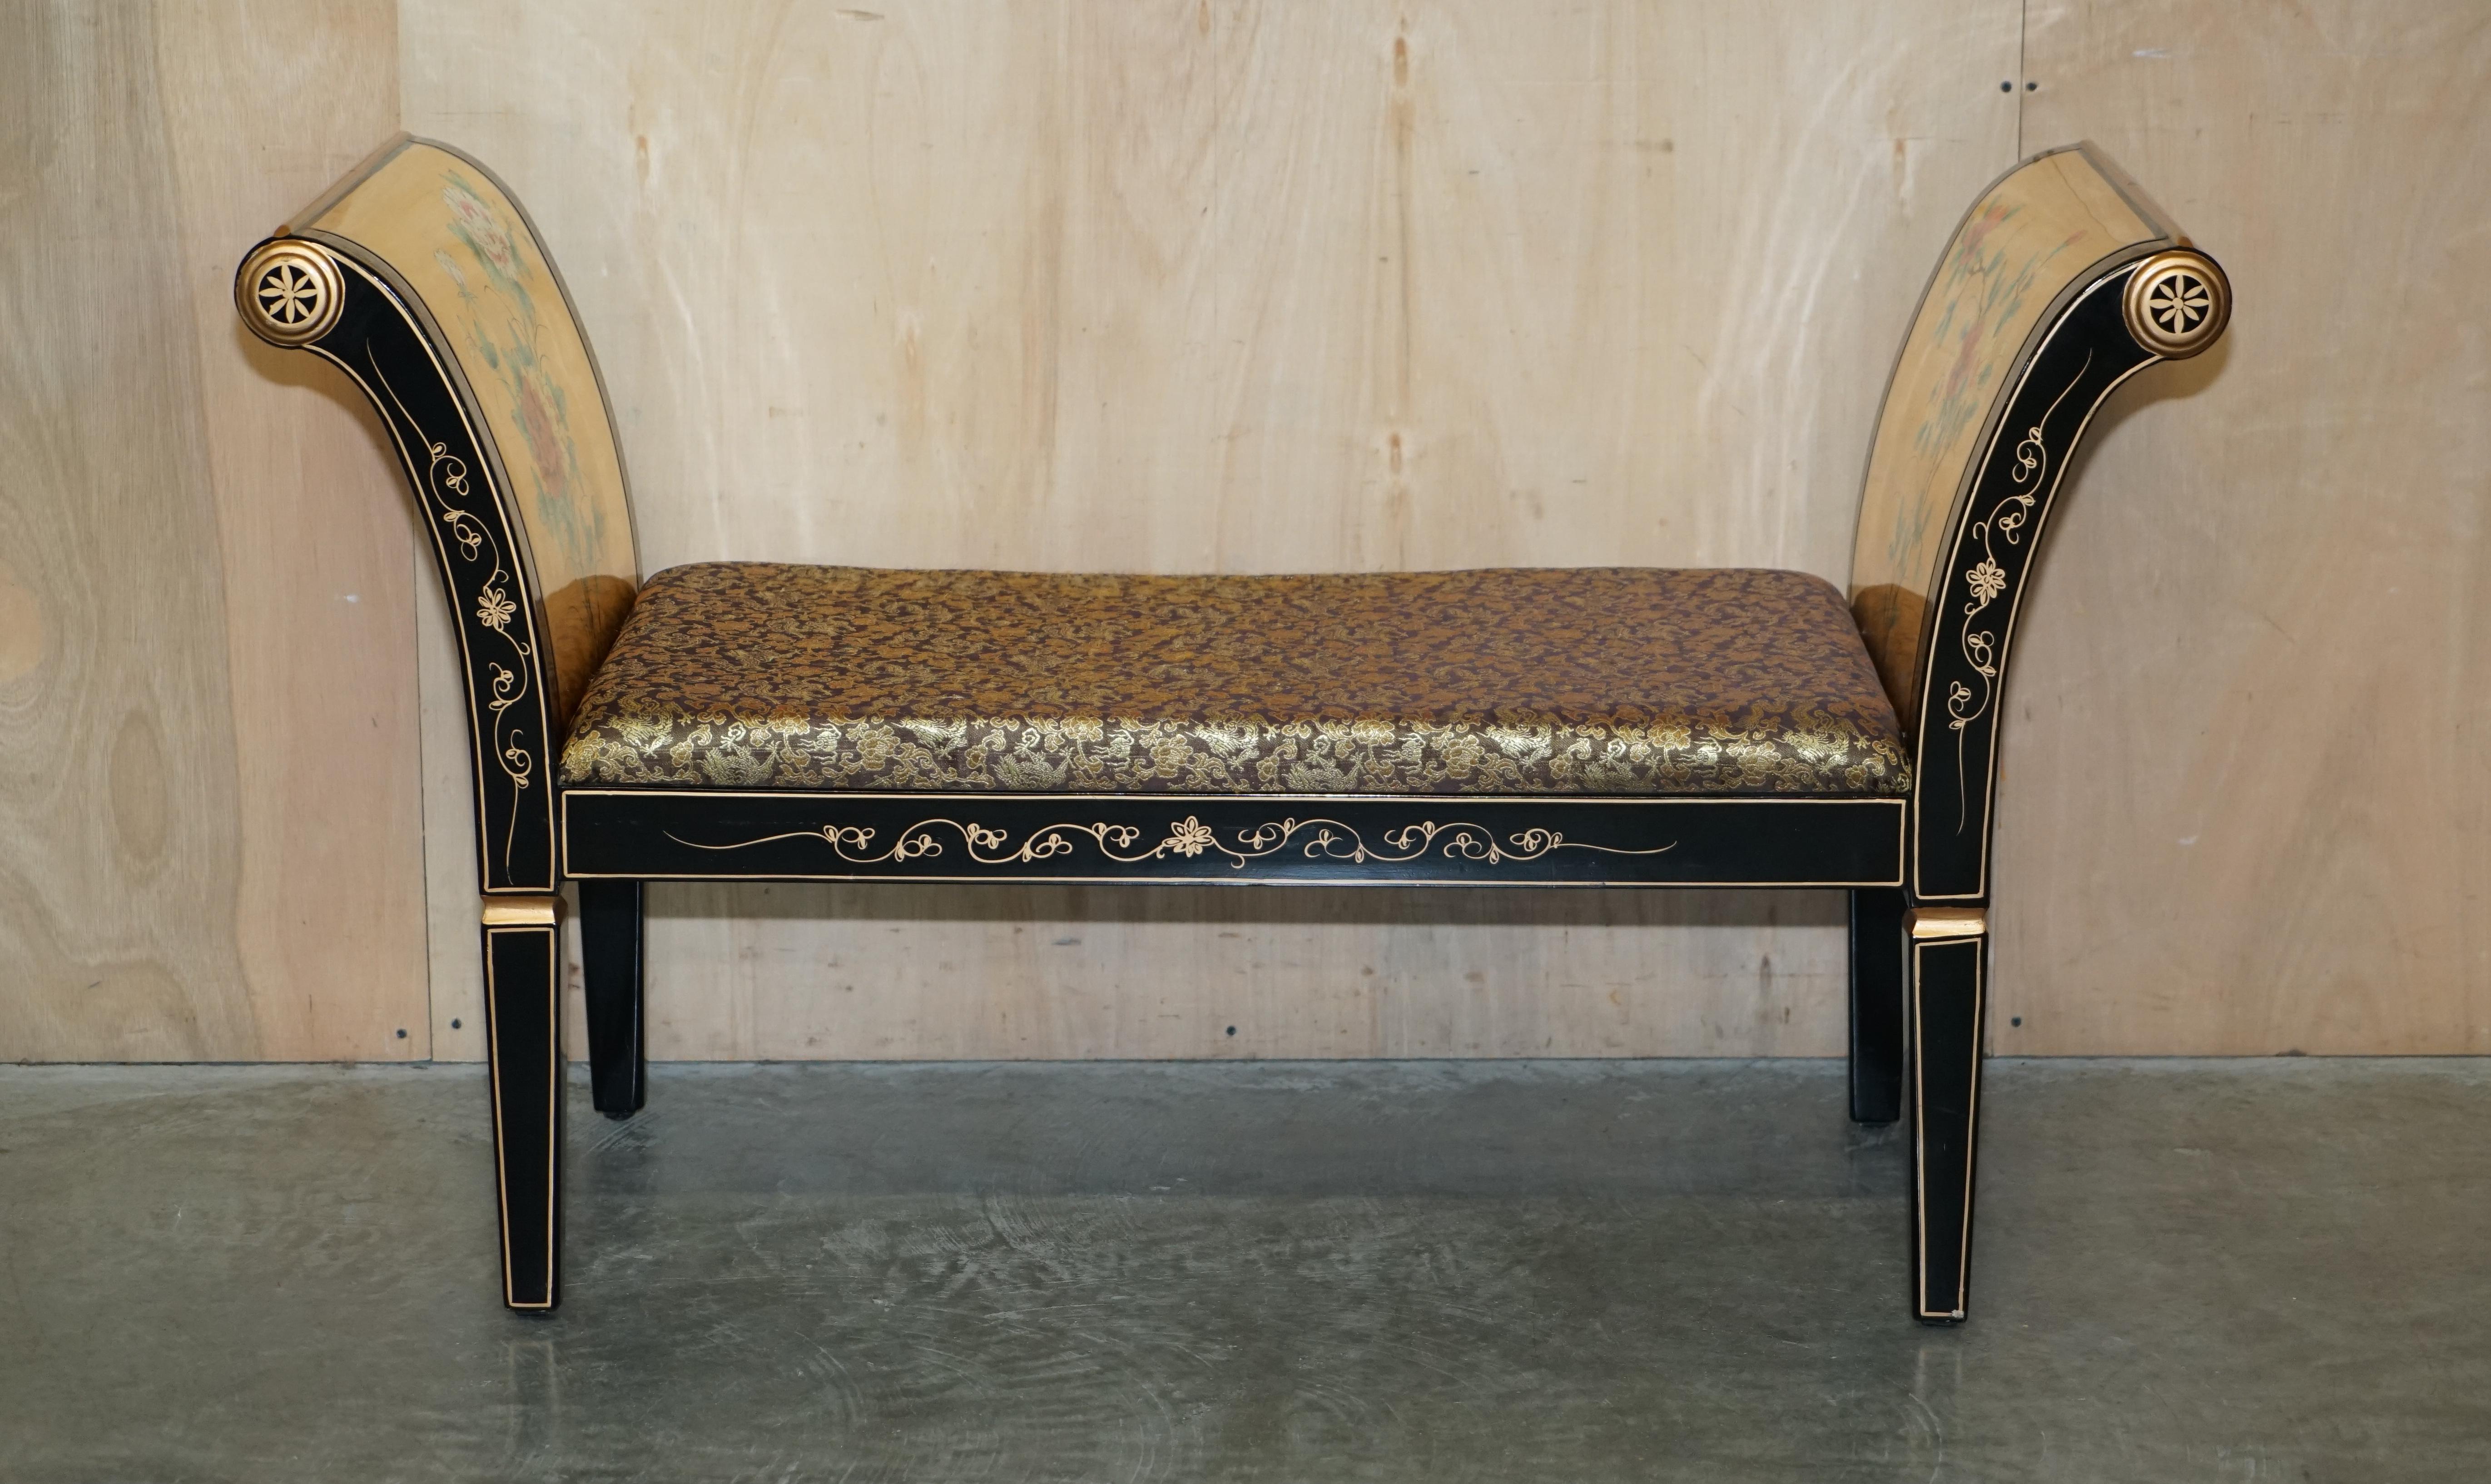 We are delighted to offer for sale this stunning antique Chinese Chinoiserie, hand made bench or window seat with gold Dragon upholstery and Soapstone & Mother of Pearl Geisha Girl decoration 

A truly stunning piece, this is pure art furniture